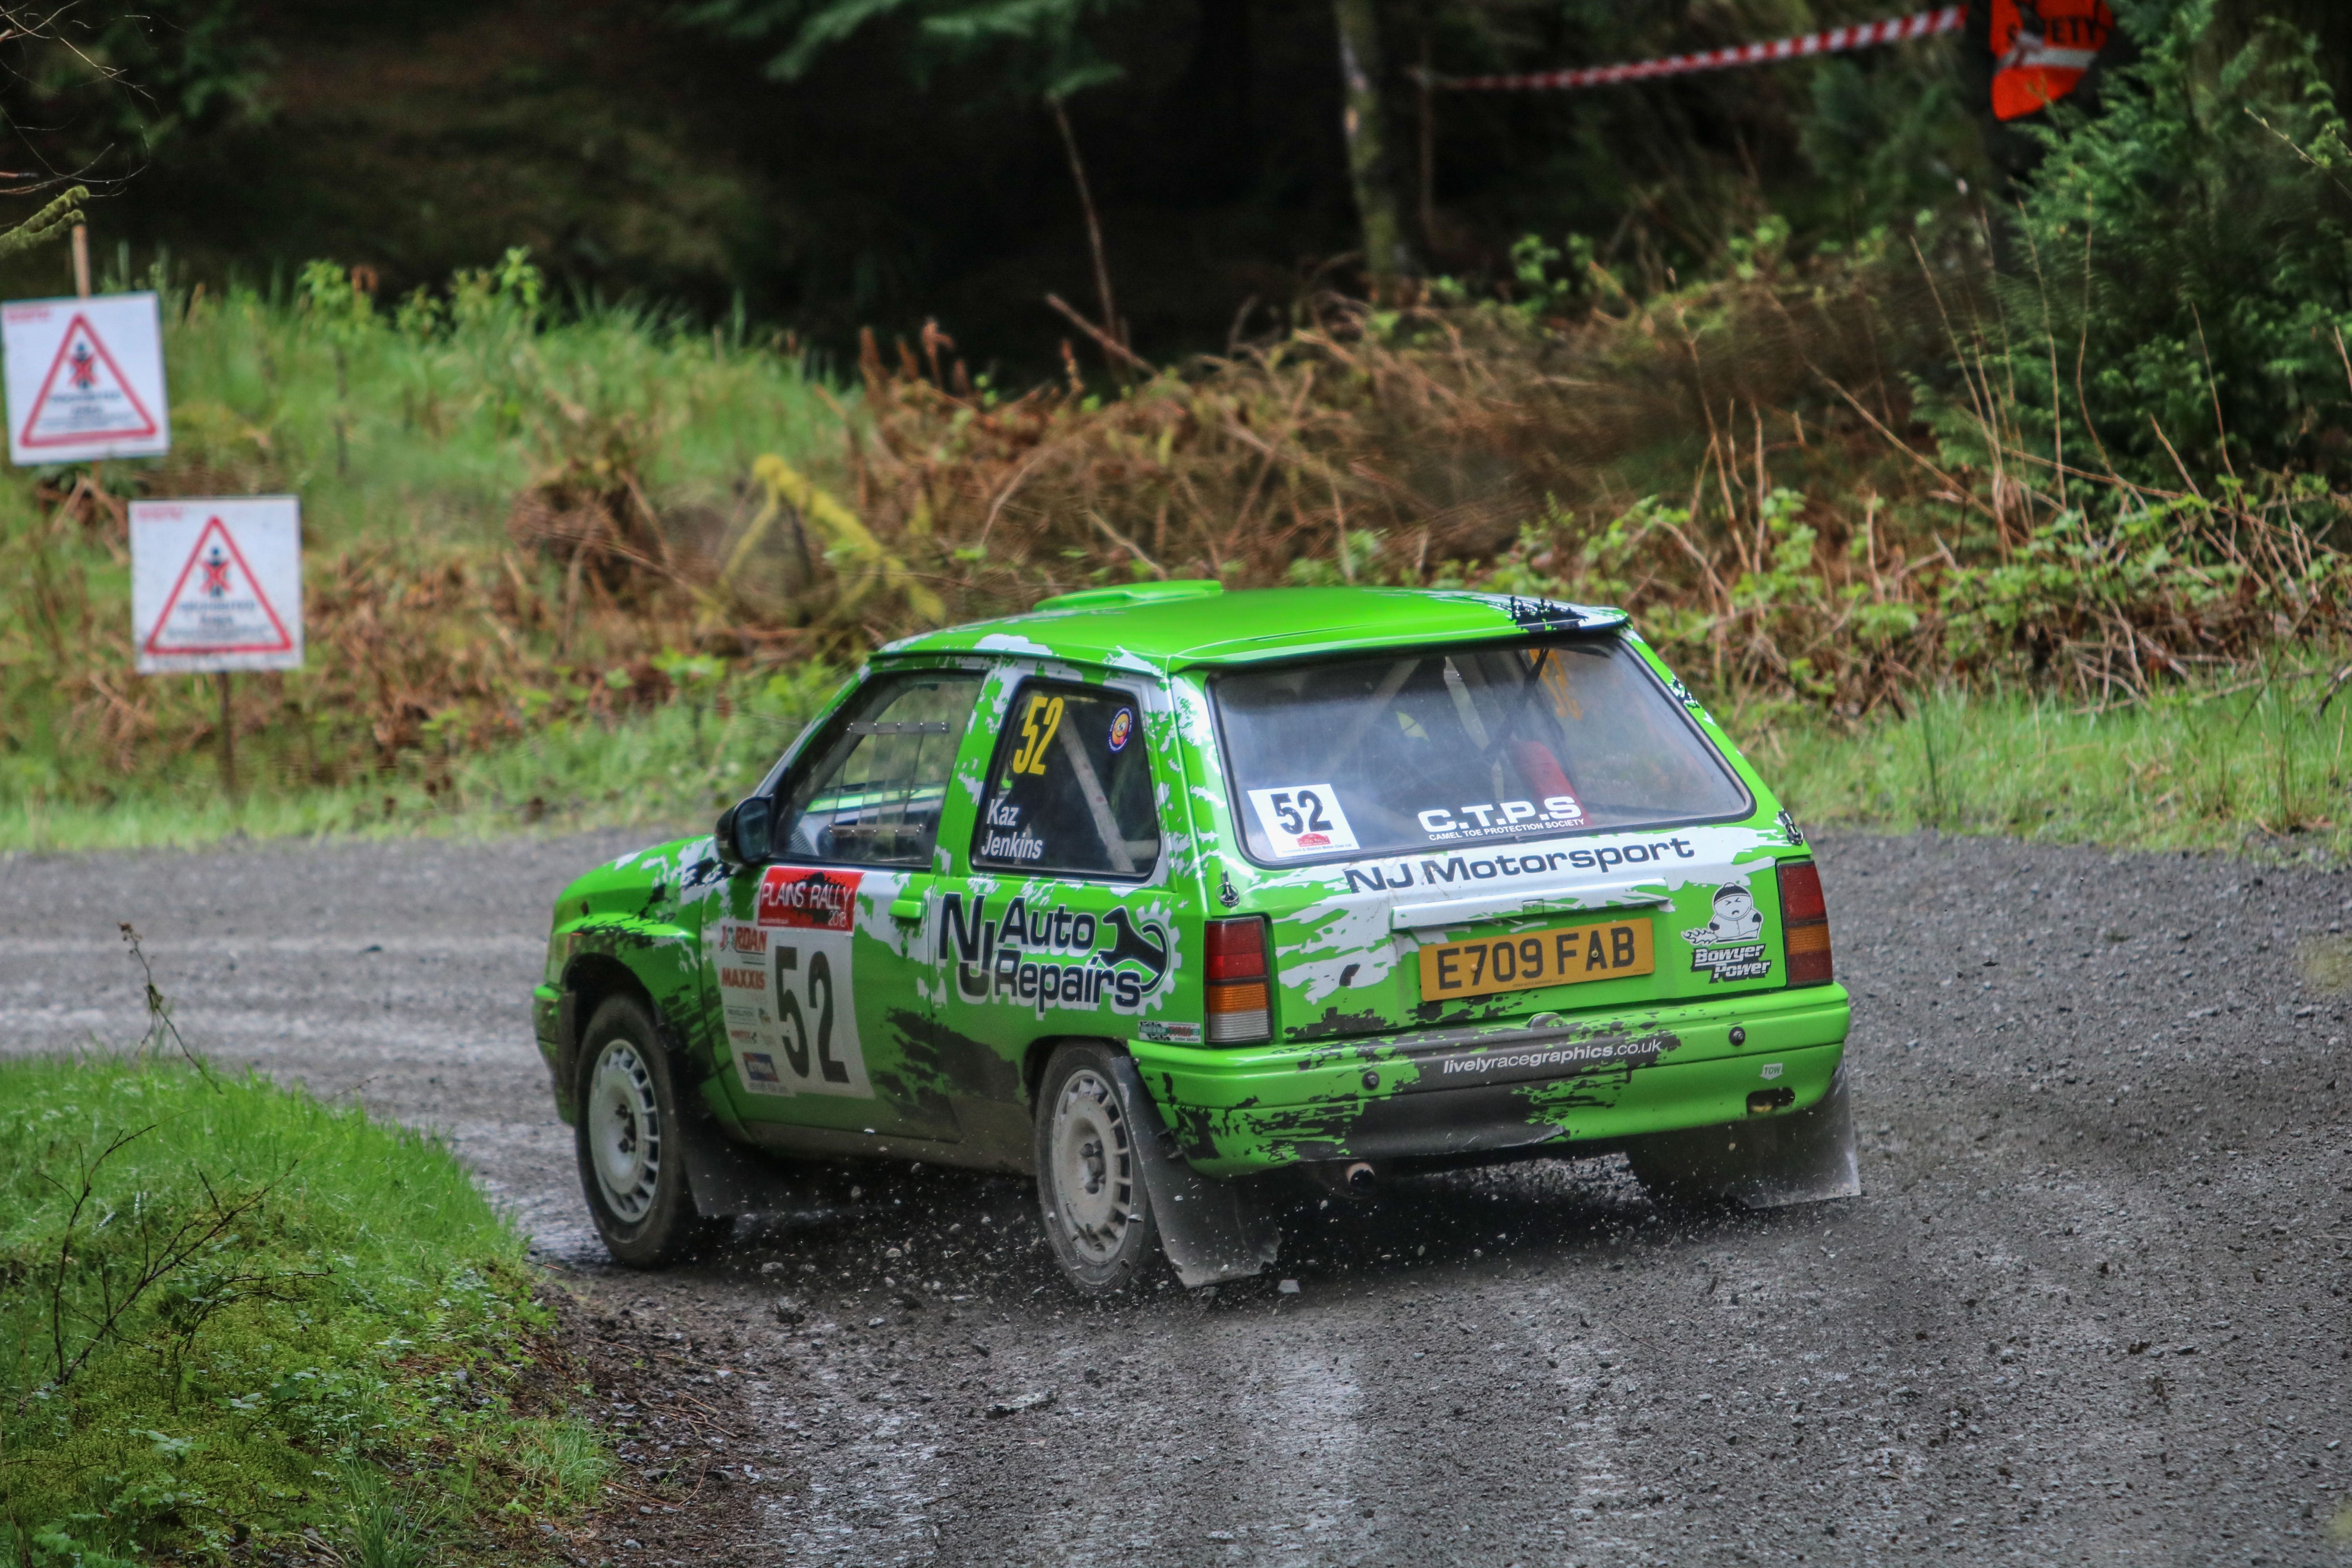 Mr Tyre offers Nicky Grist Stages incentive